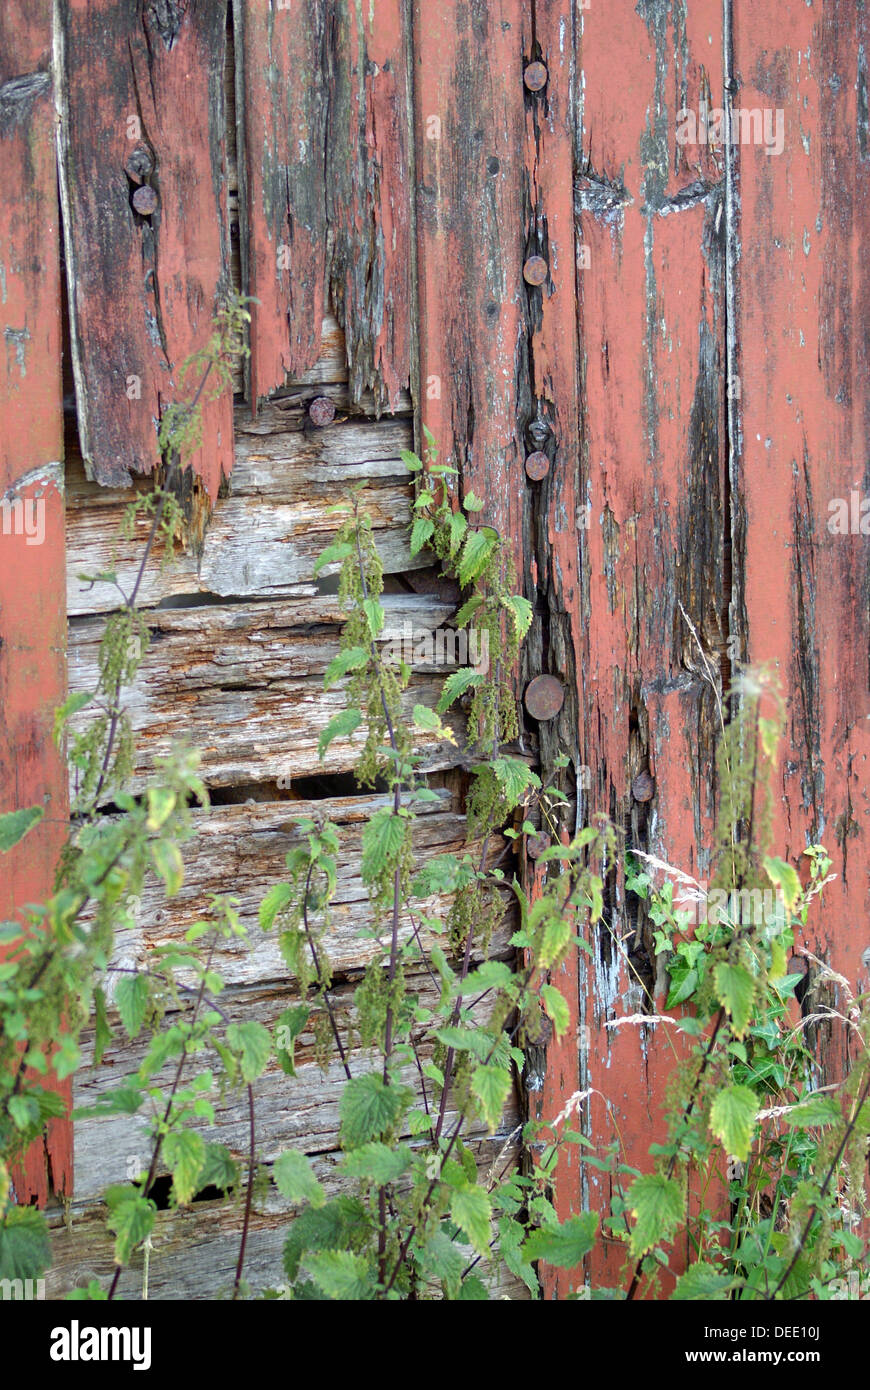 Old railway carriage decaying and overgrown Stock Photo